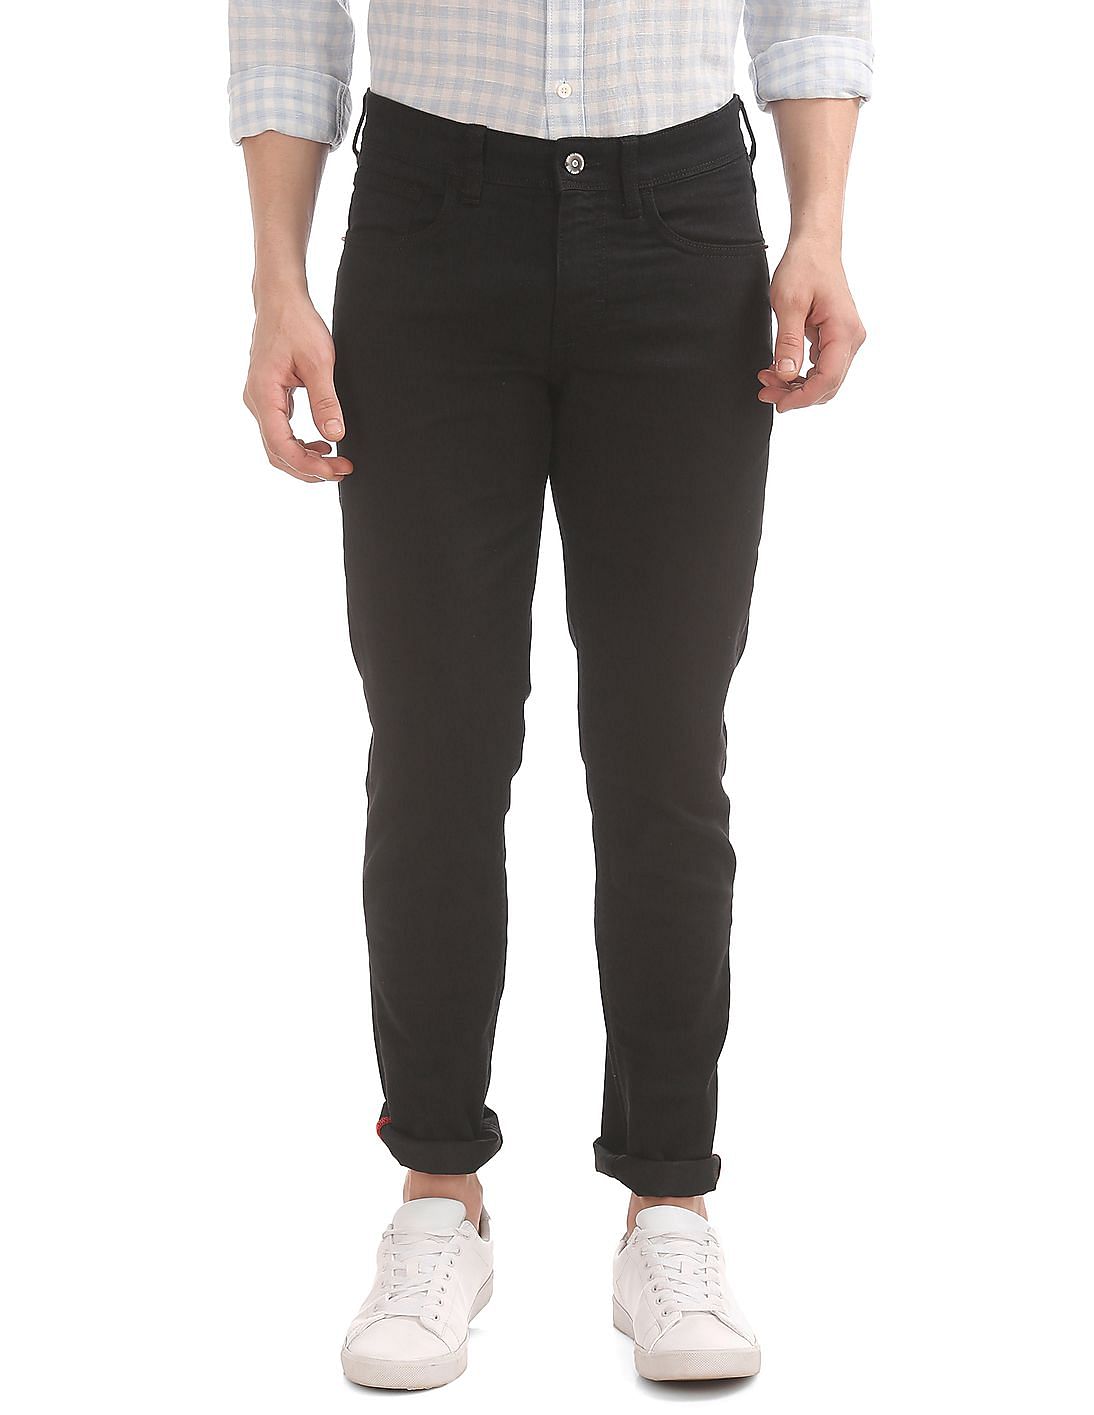 Buy Men Mid Rise Slim Fit Jeans online at NNNOW.com